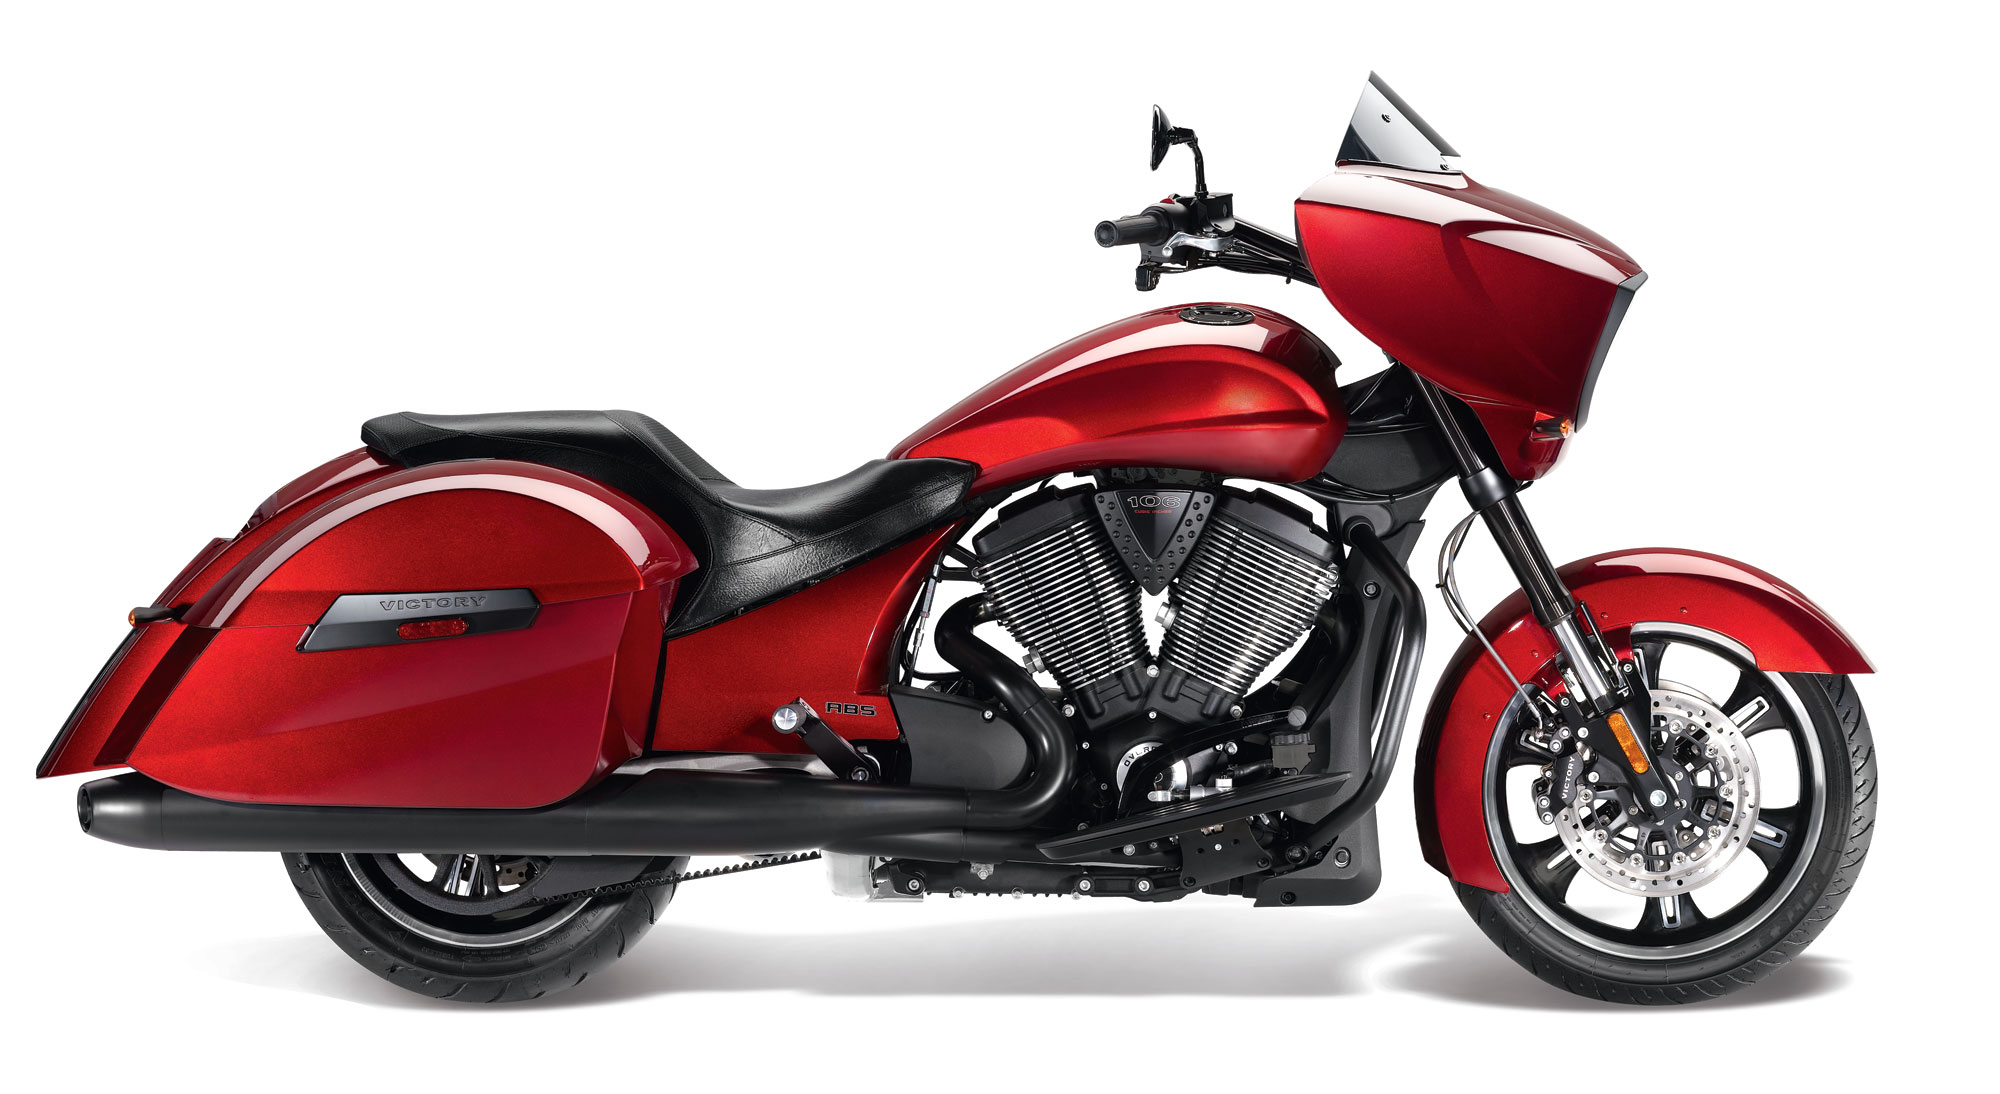 VICTORY Cross Country (2012-2013) Specs, Performance & Photos ...